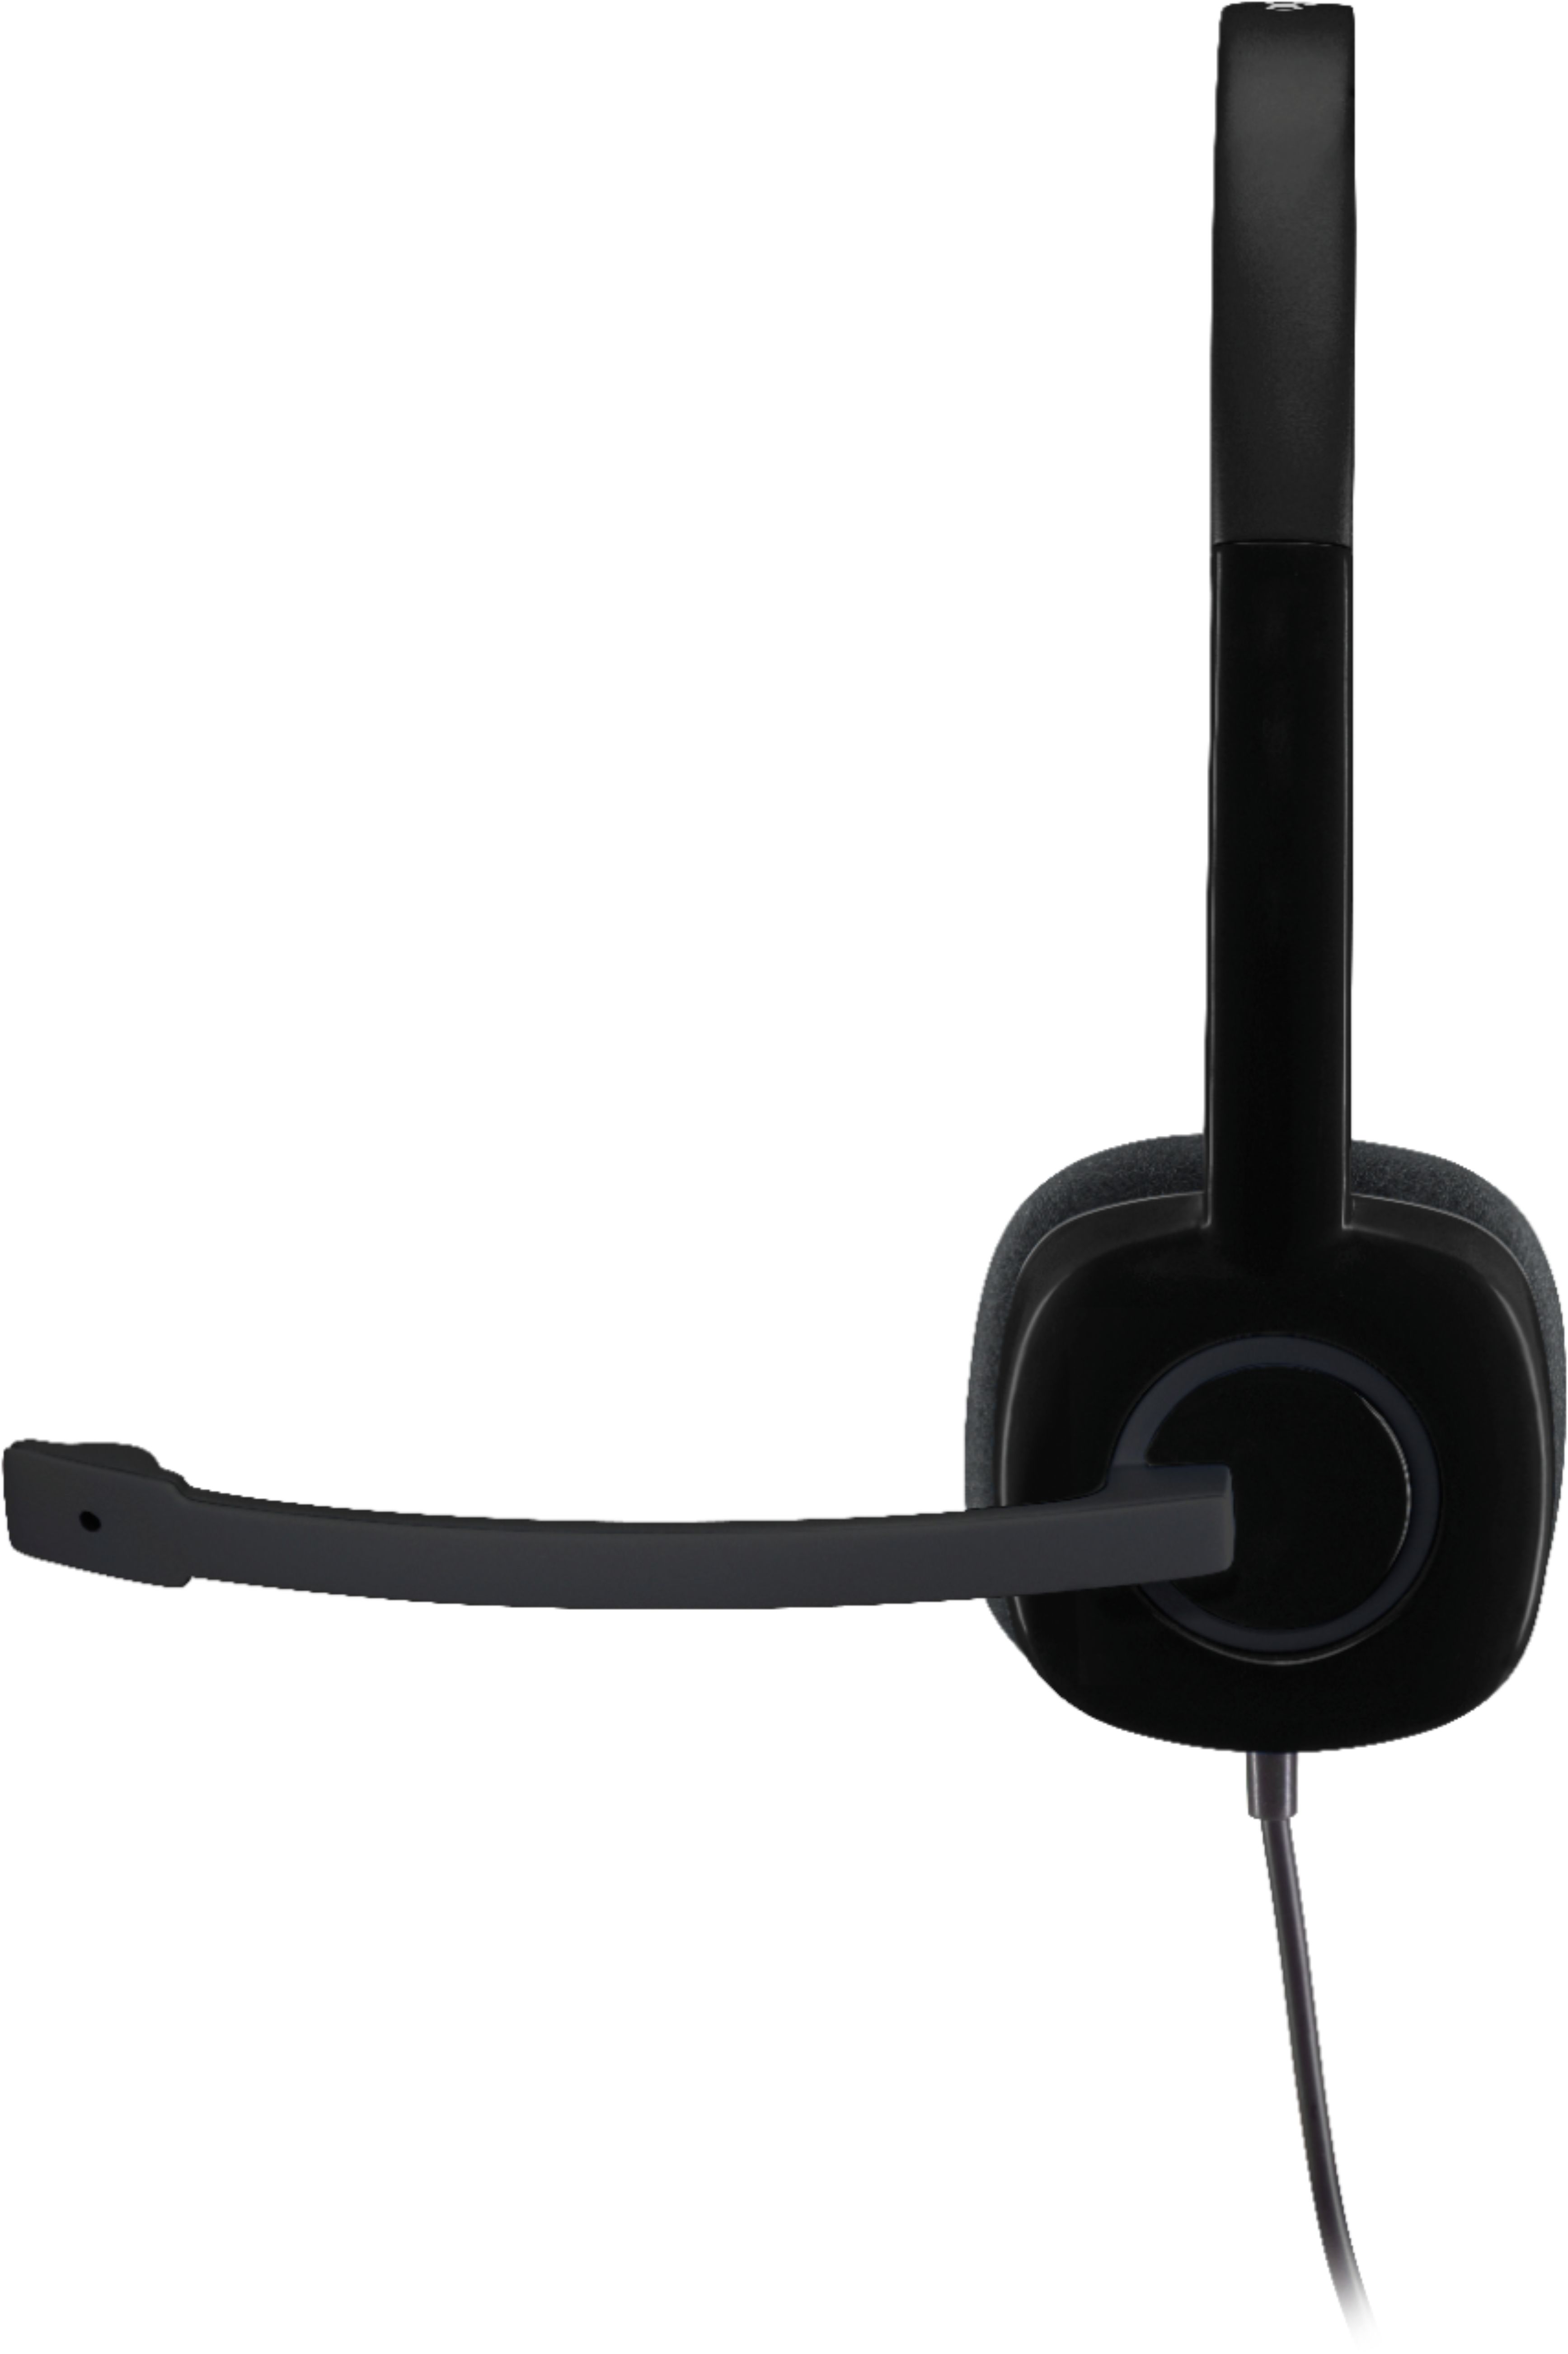 Left View: Microsoft - Modern USB Headset - Wired, On-Ear Headphones, Noise-Cancelling Microphone, In-Line Controls, for Teams & Zoom - Black